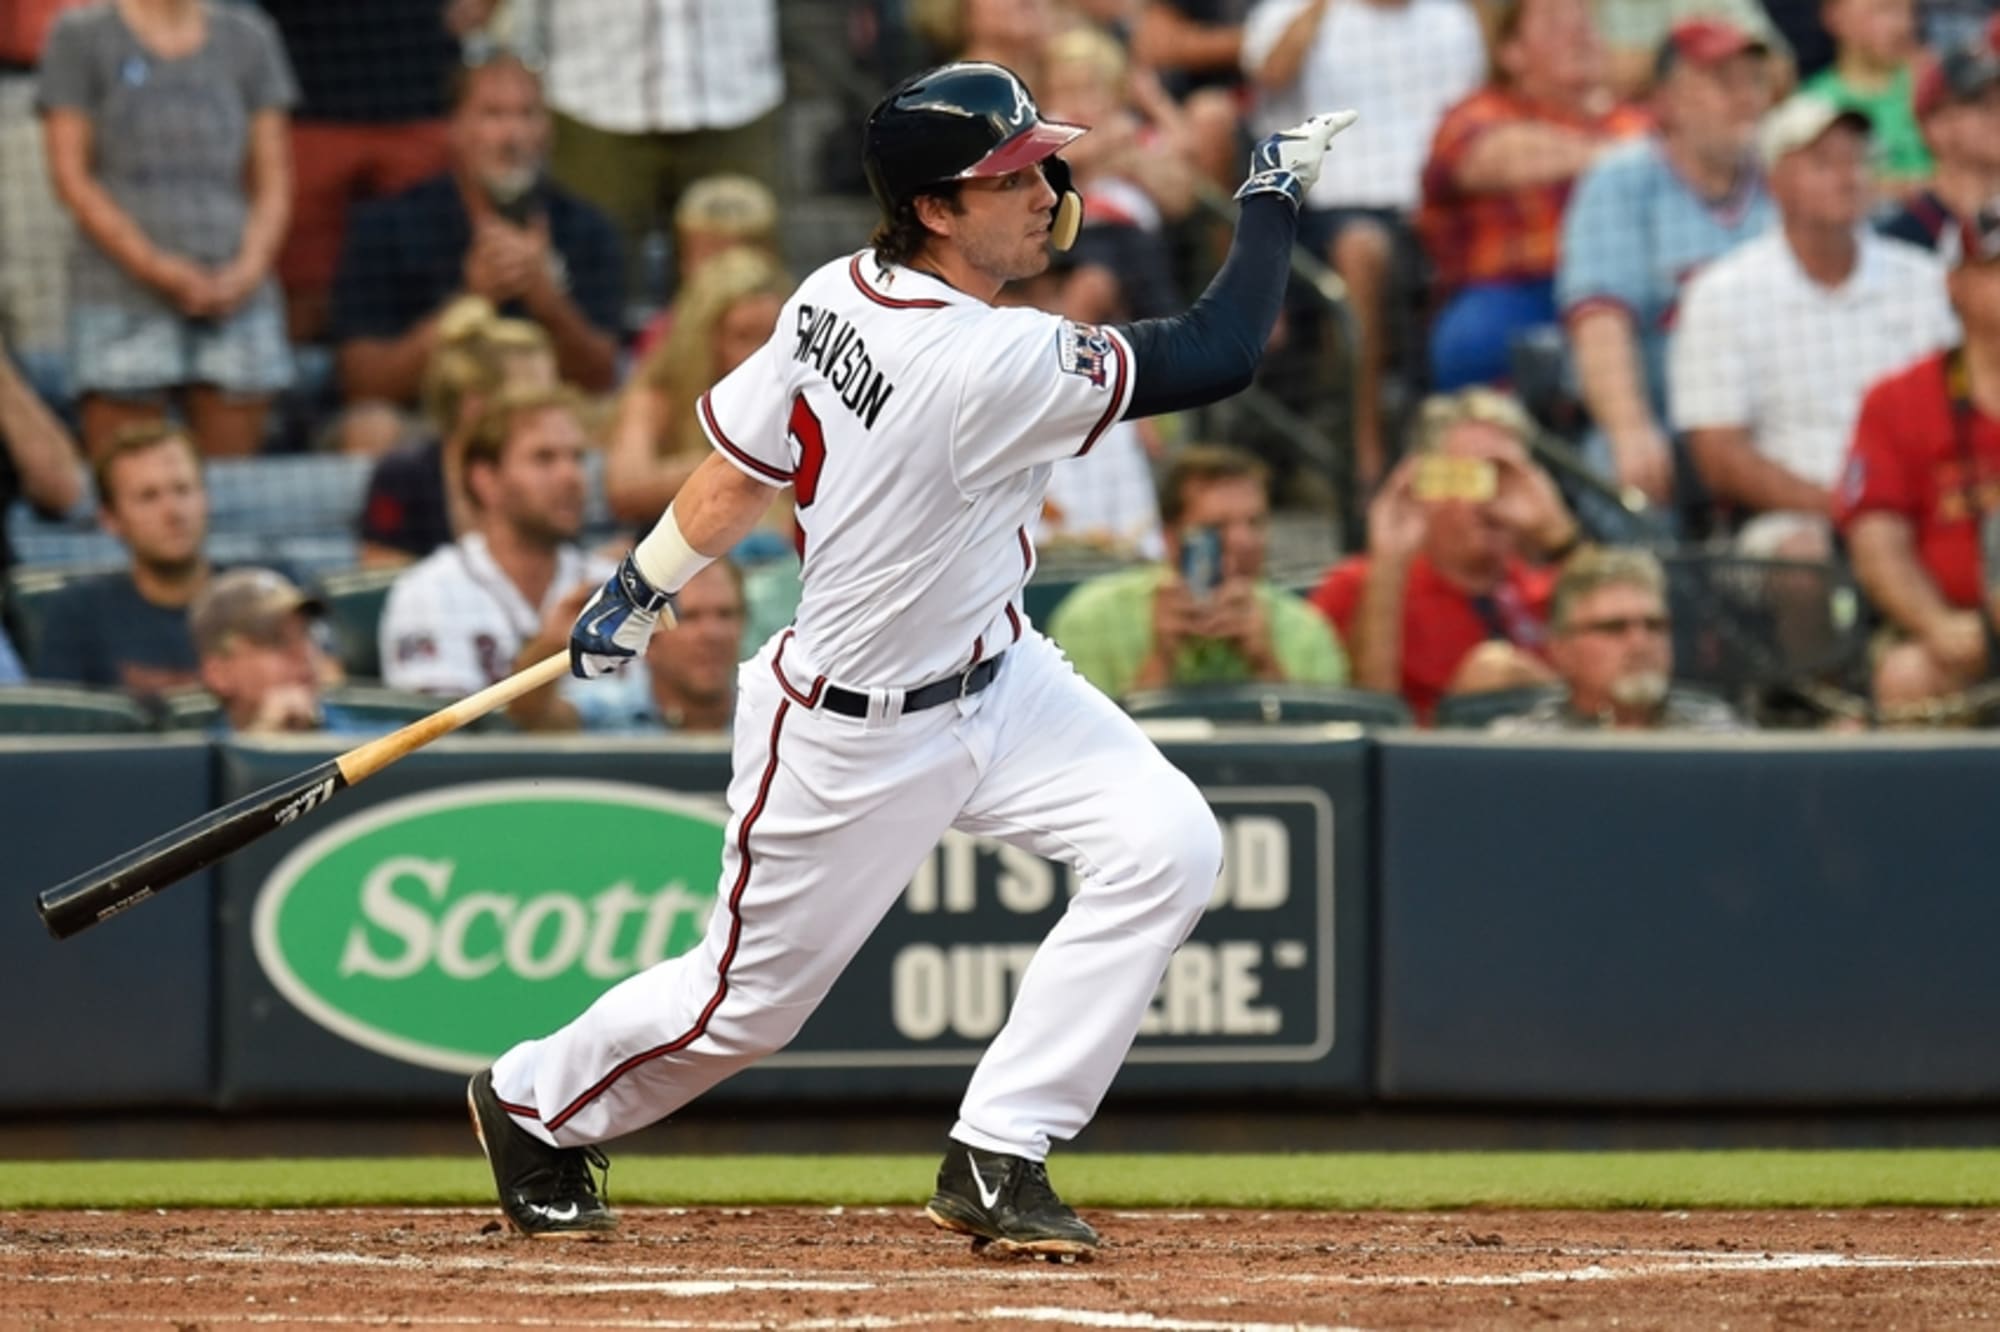 Atlanta Braves shortstop Dansby Swanson (7) hits a home run during